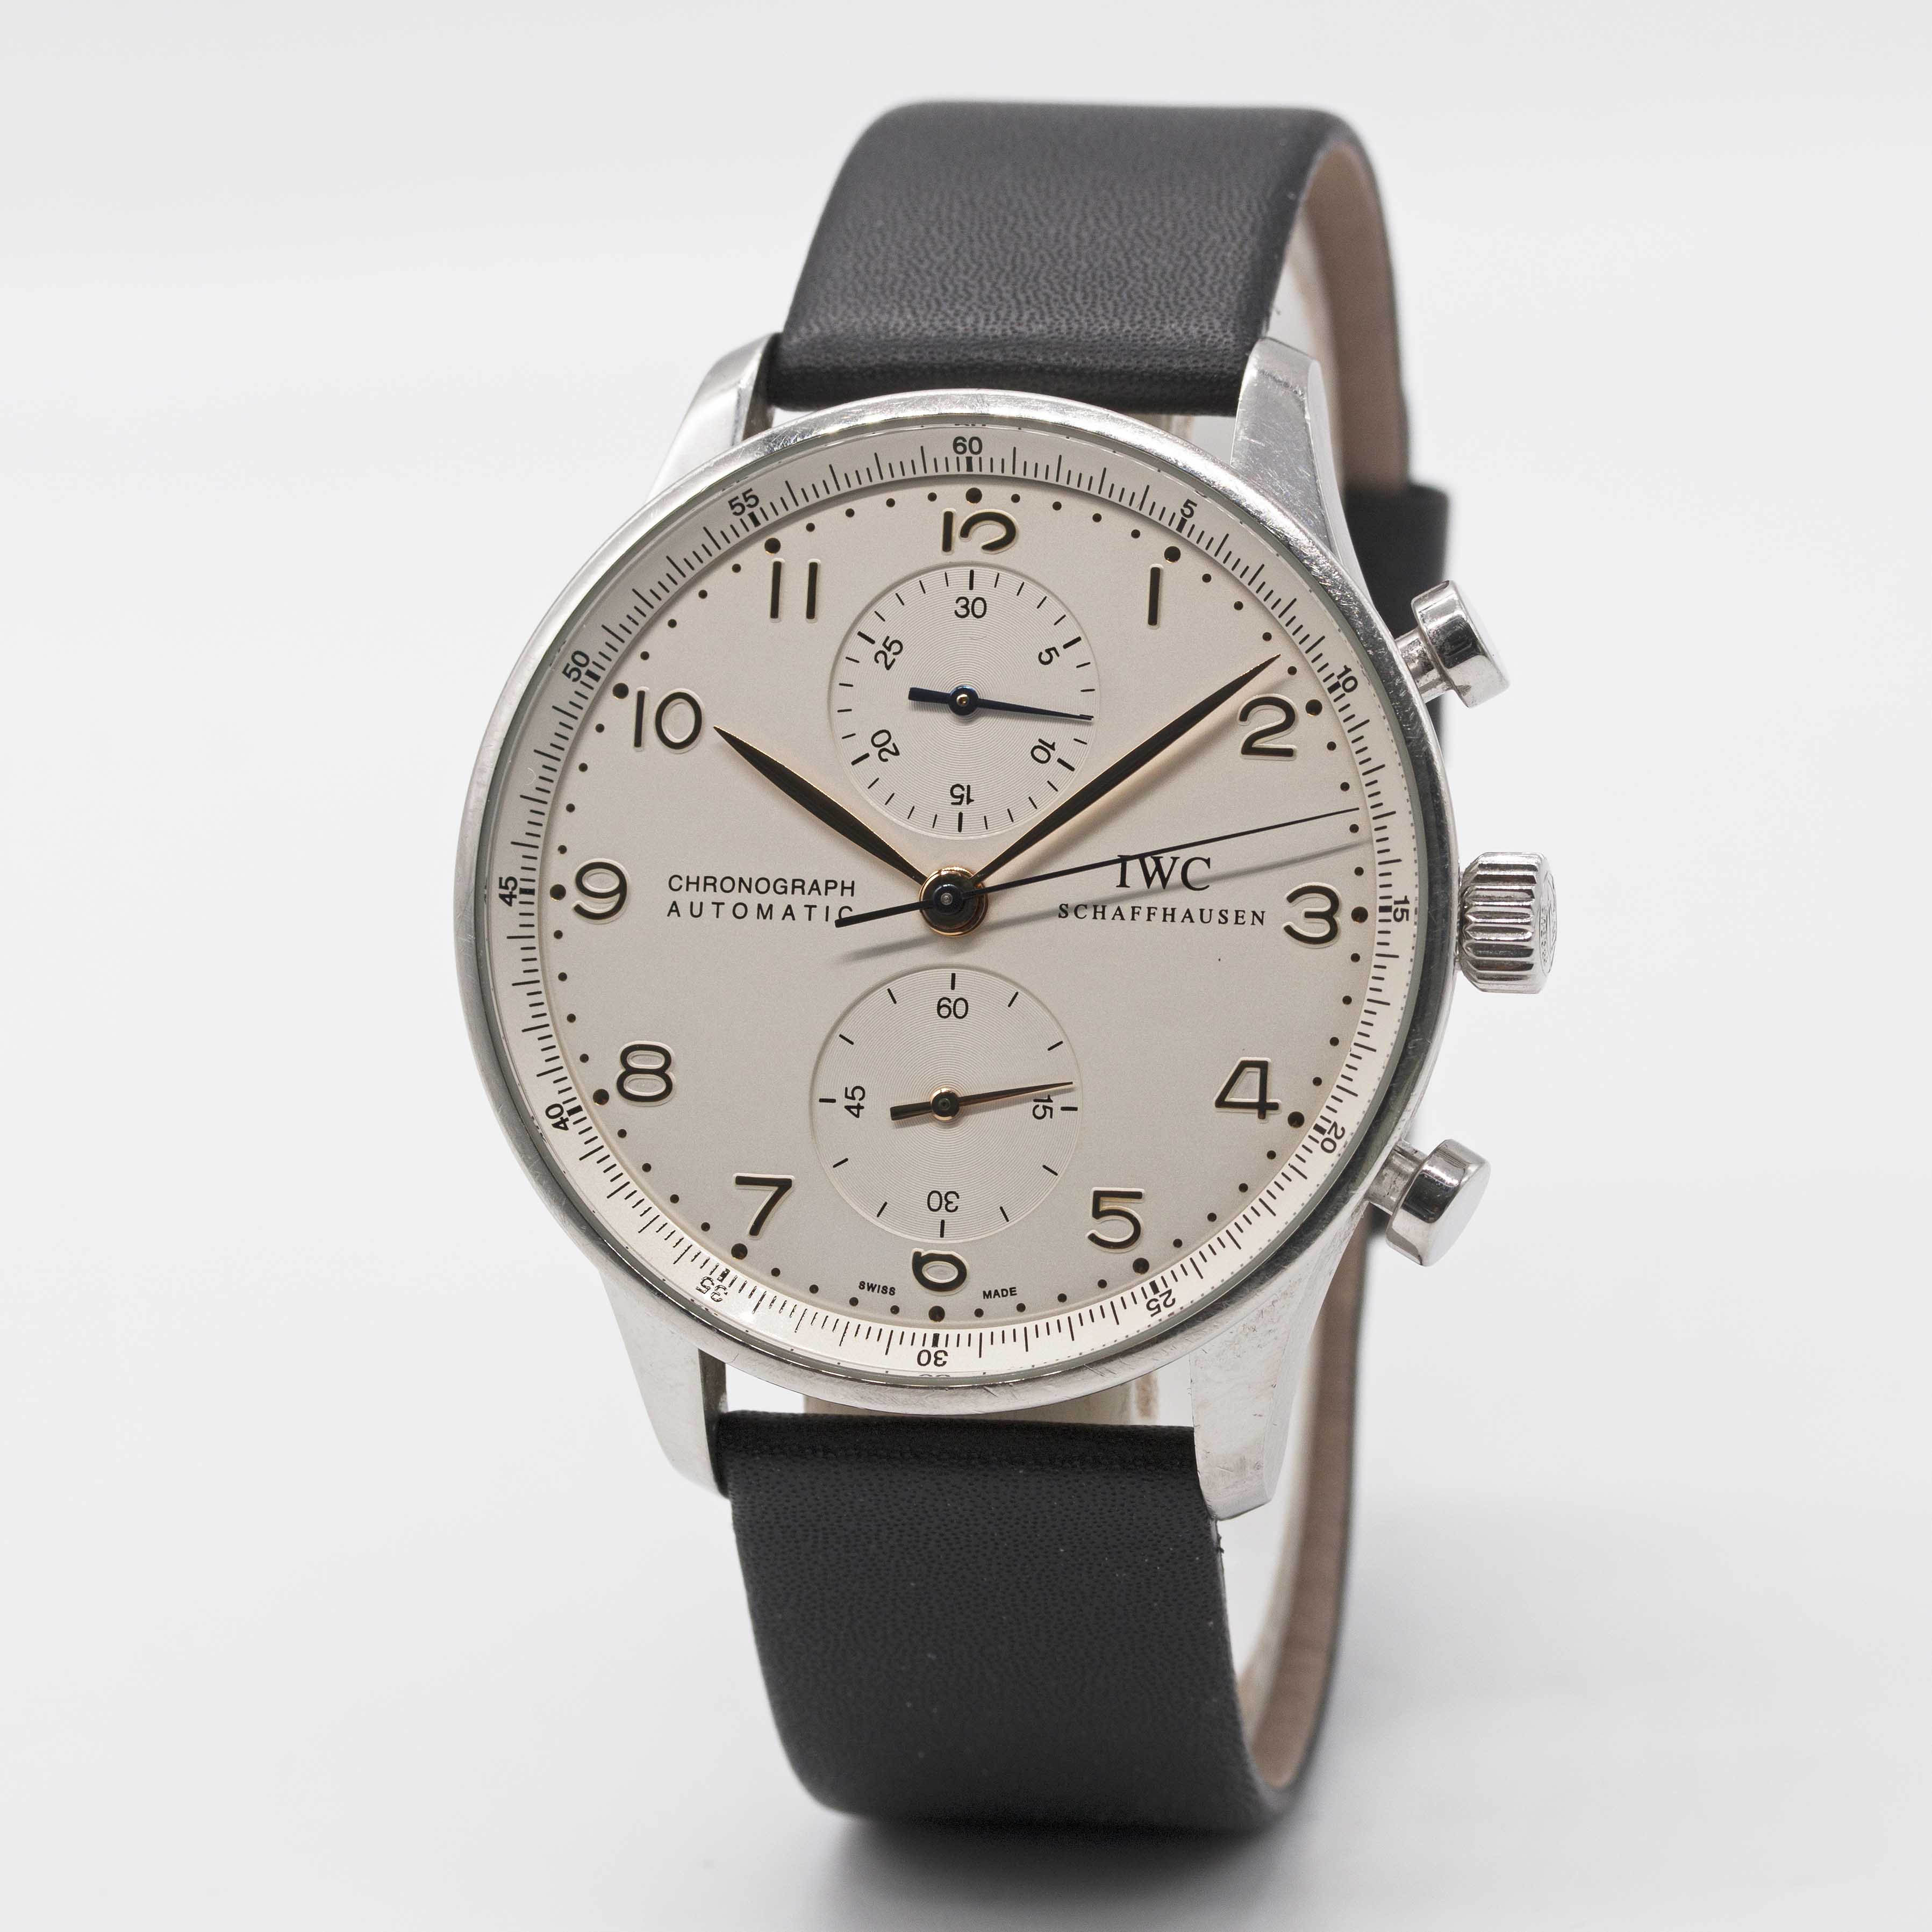 A GENTLEMAN'S STAINLESS STEEL IWC PORTUGUESE AUTOMATIC CHRONOGRAPH WRIST WATCH DATED 2007, REF. - Image 3 of 8